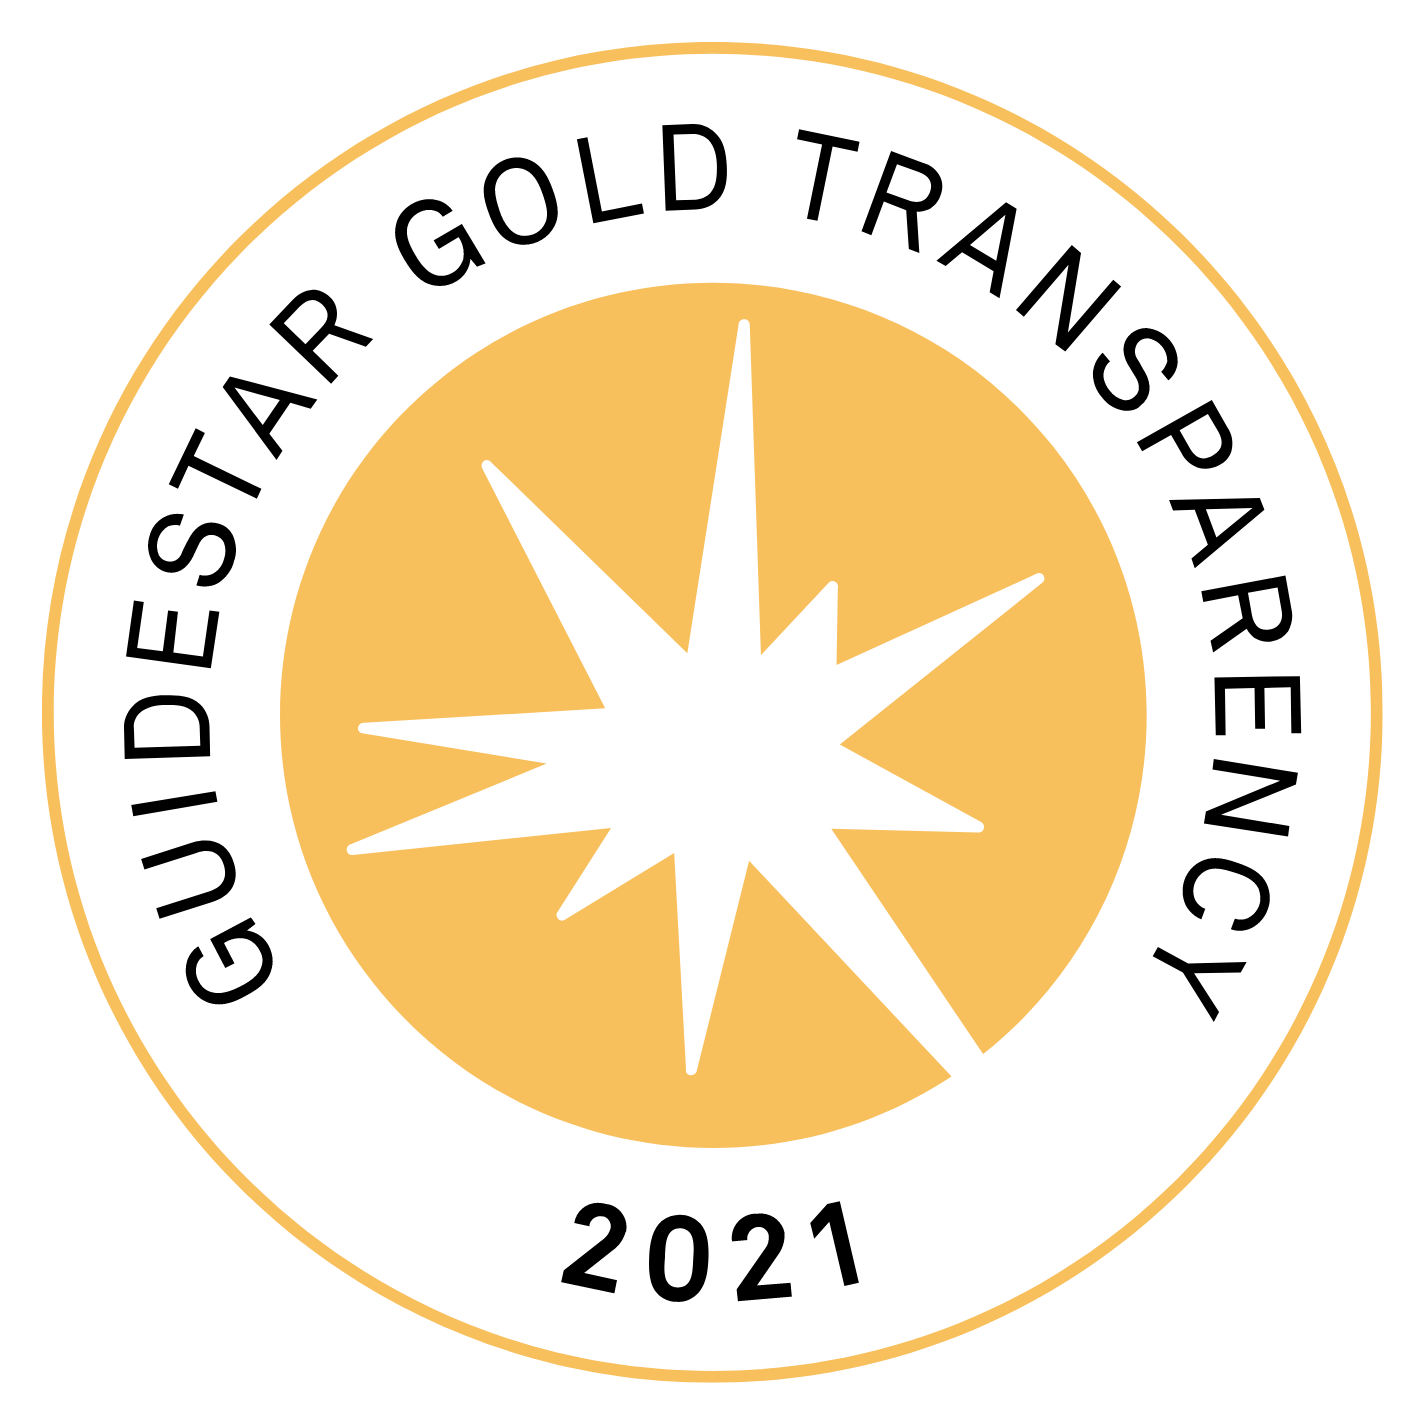 Guidestar Gold Transparancy 2021 seal in gold color